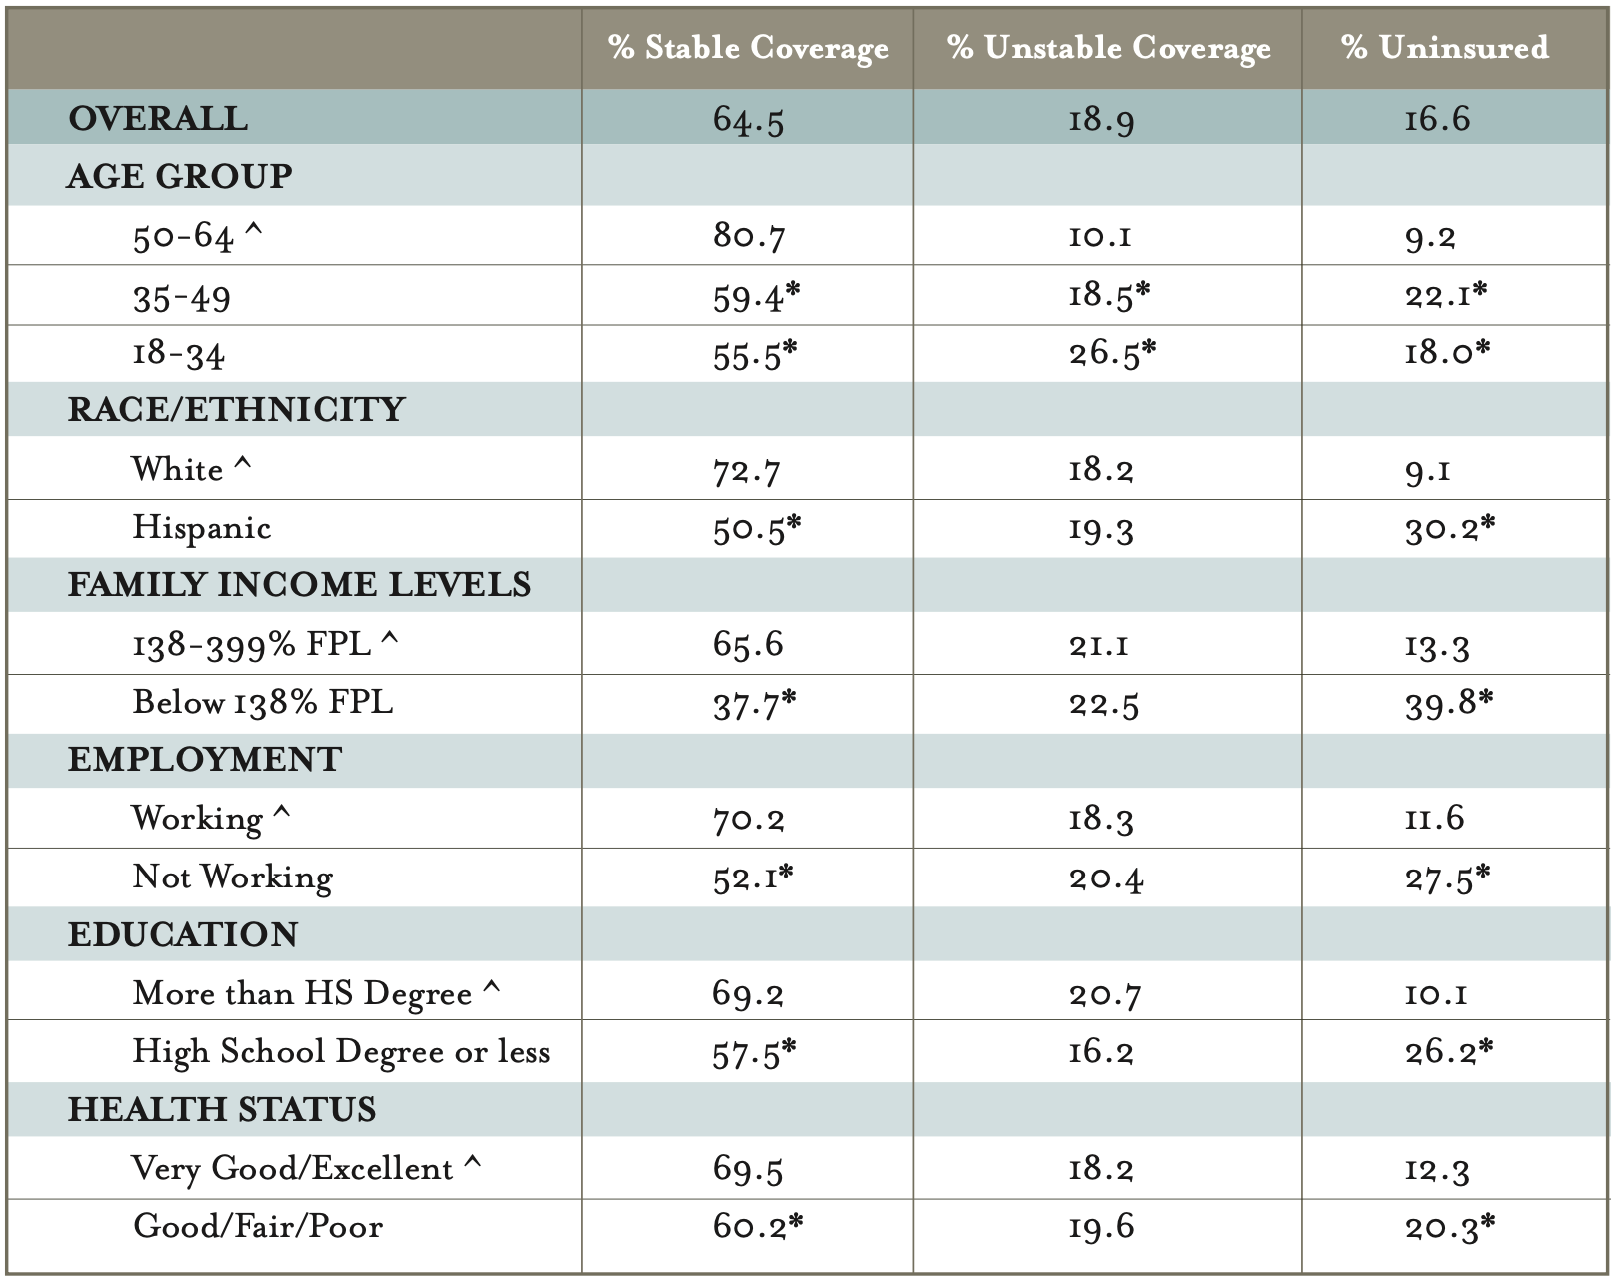 This table compares insurance coverage status across various demographic characteristics.